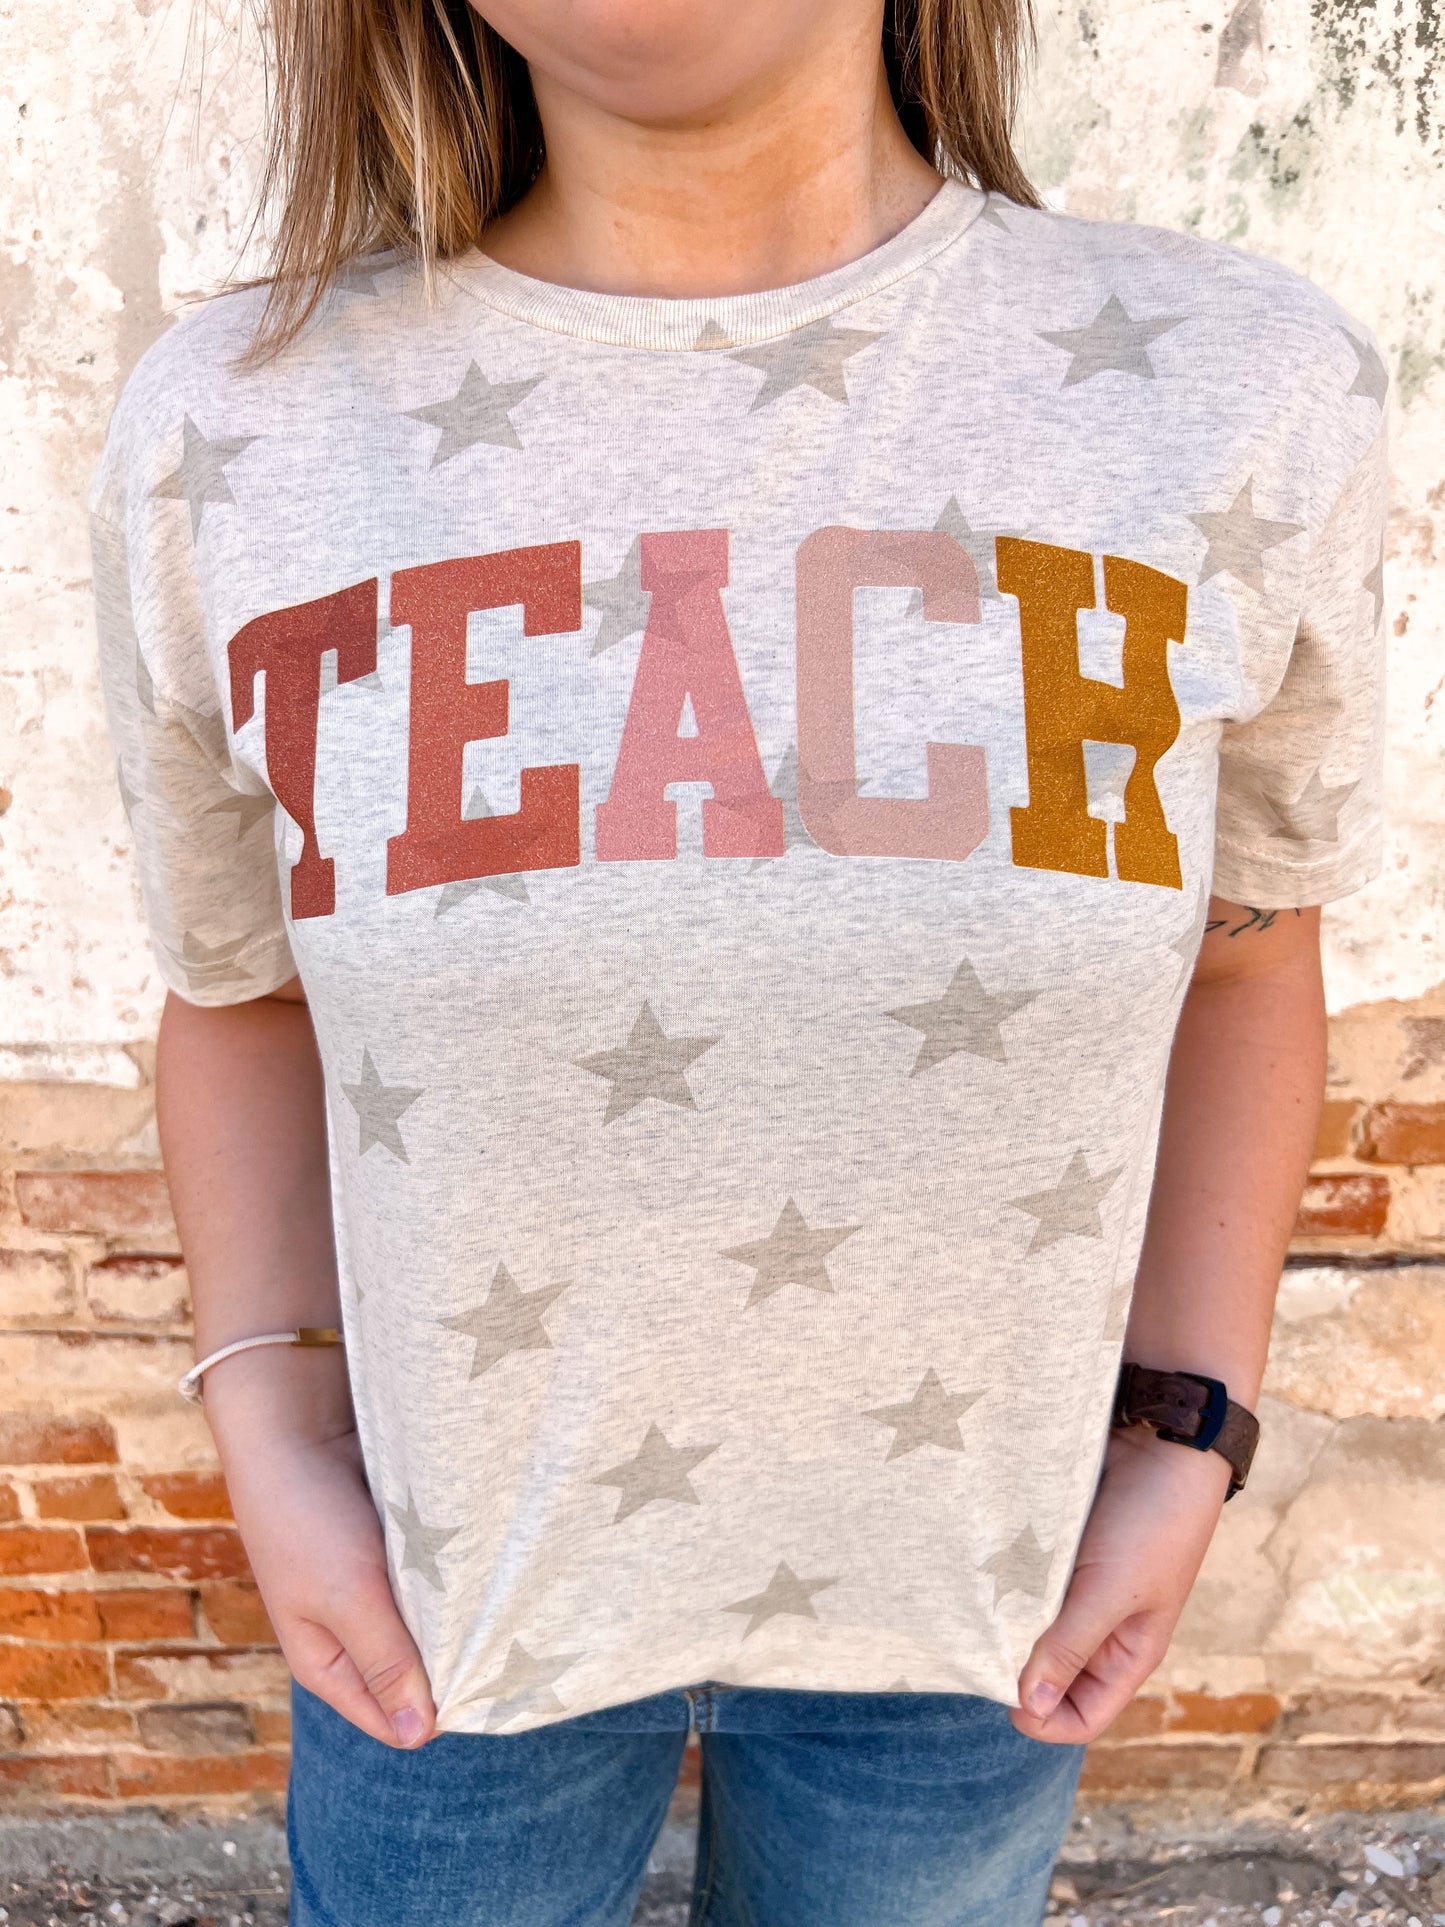 Teach Oatmeal Star Tee Shirt-Shirt-p&pd-11/28/23 md, 1st md-The Twisted Chandelier